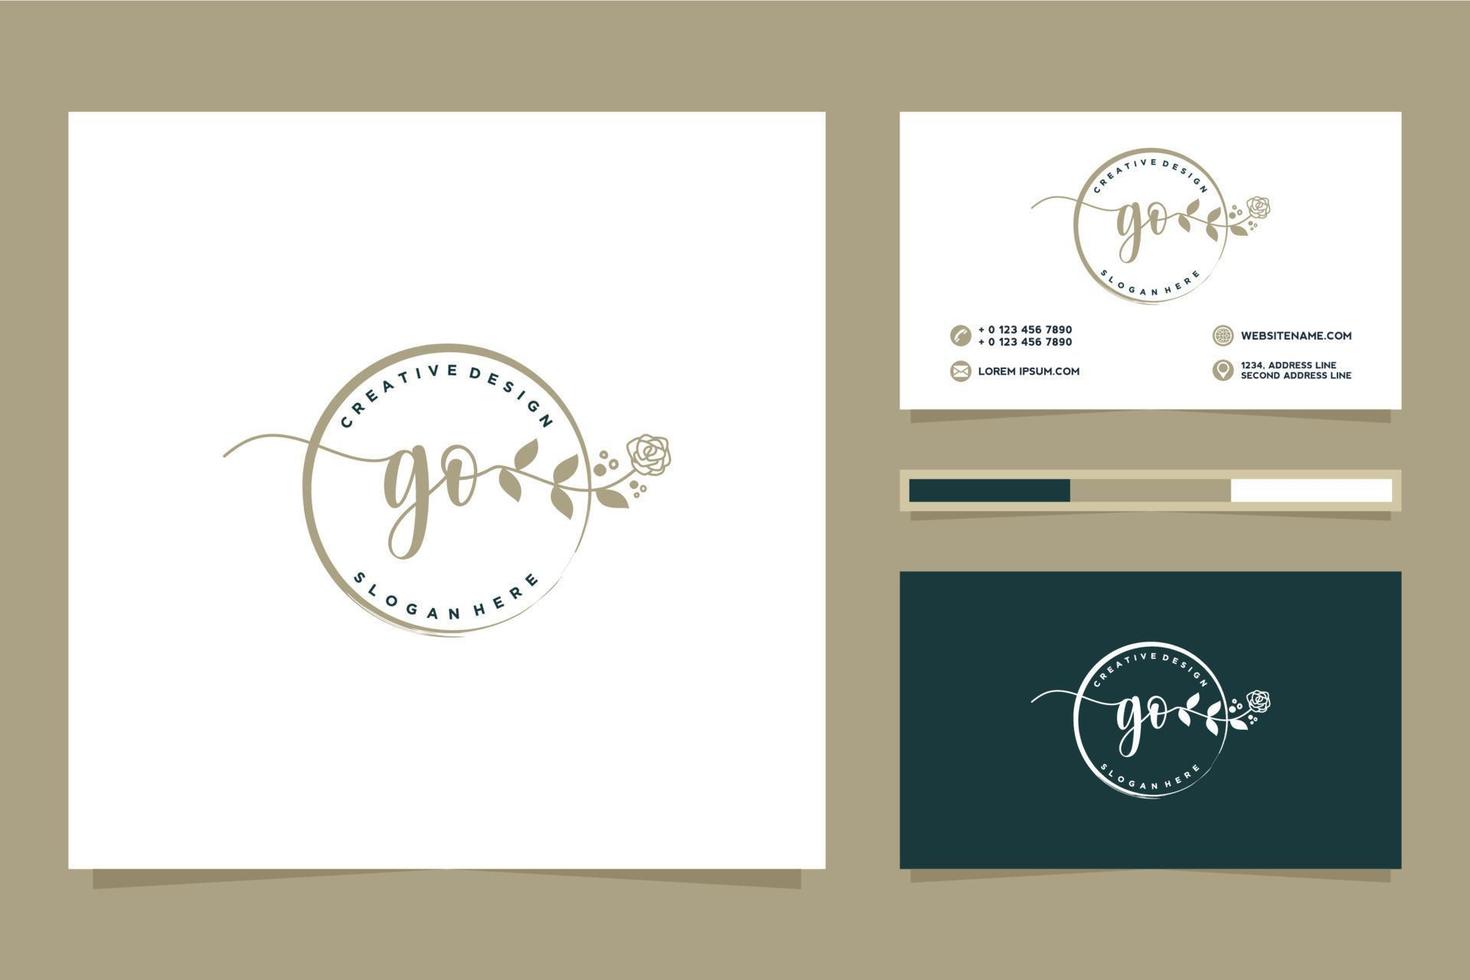 Initial GO Feminine logo collections and business card templat Premium Vector